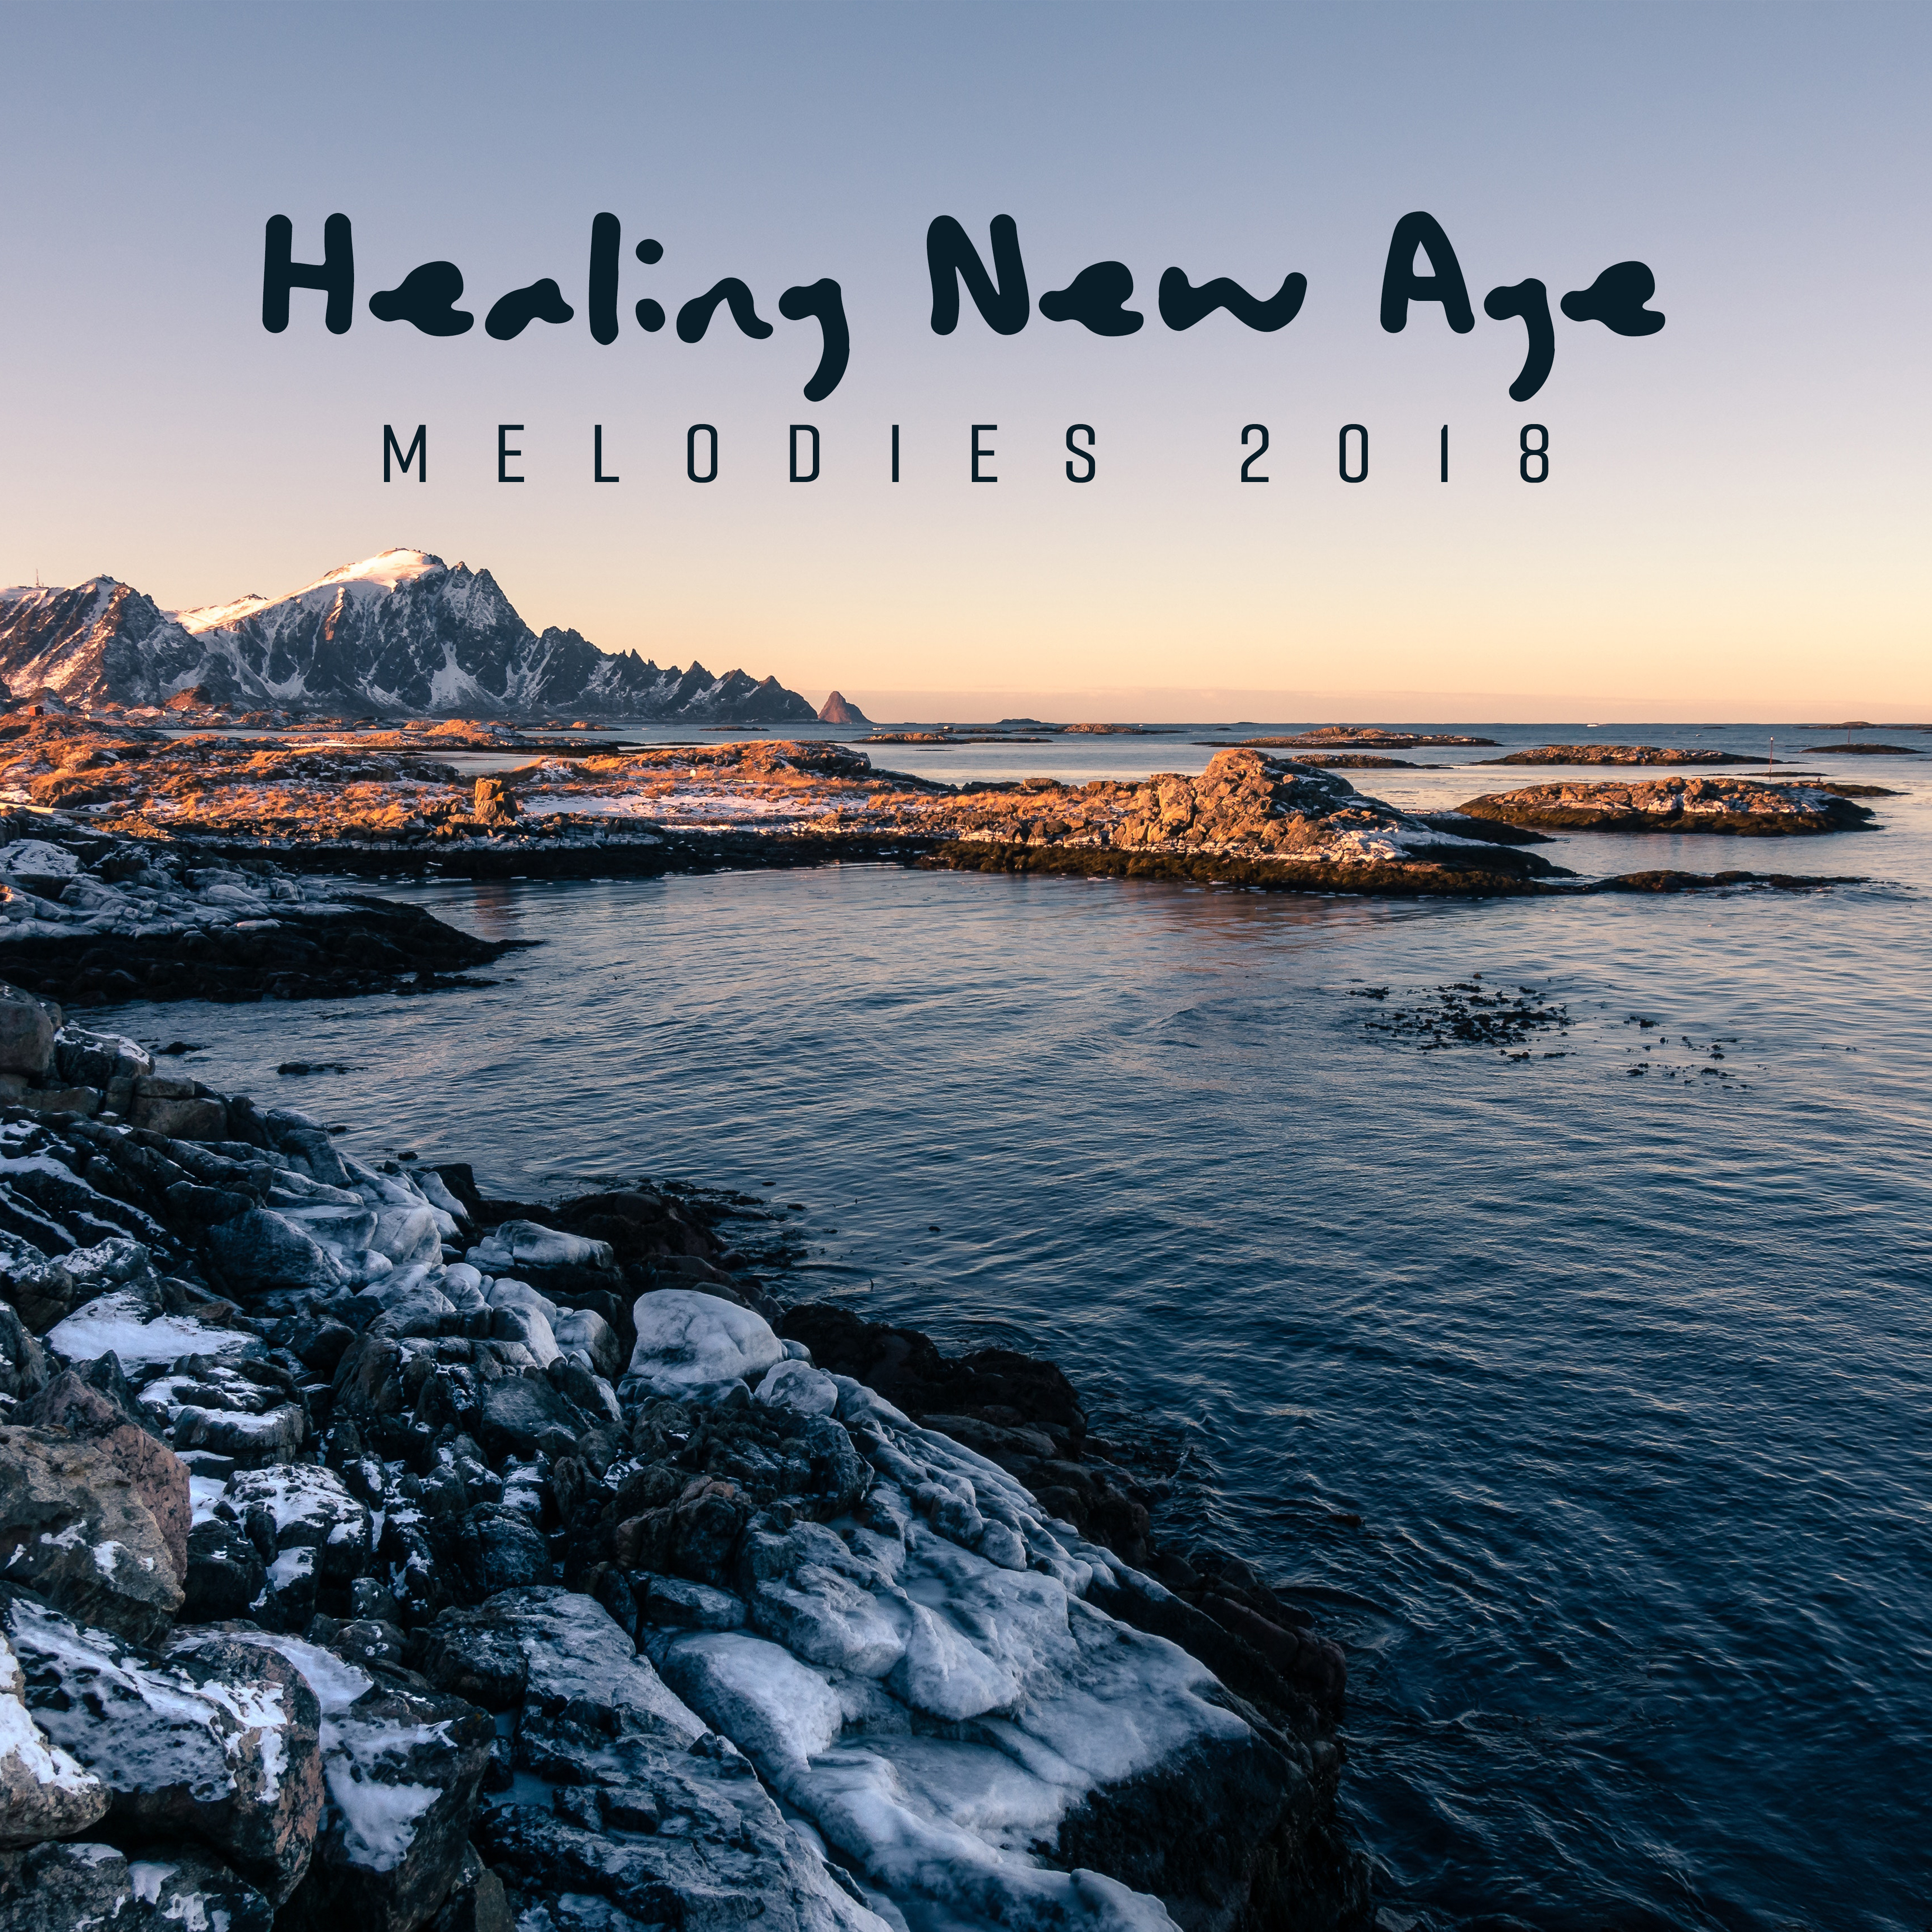 Healing New Age Melodies 2018